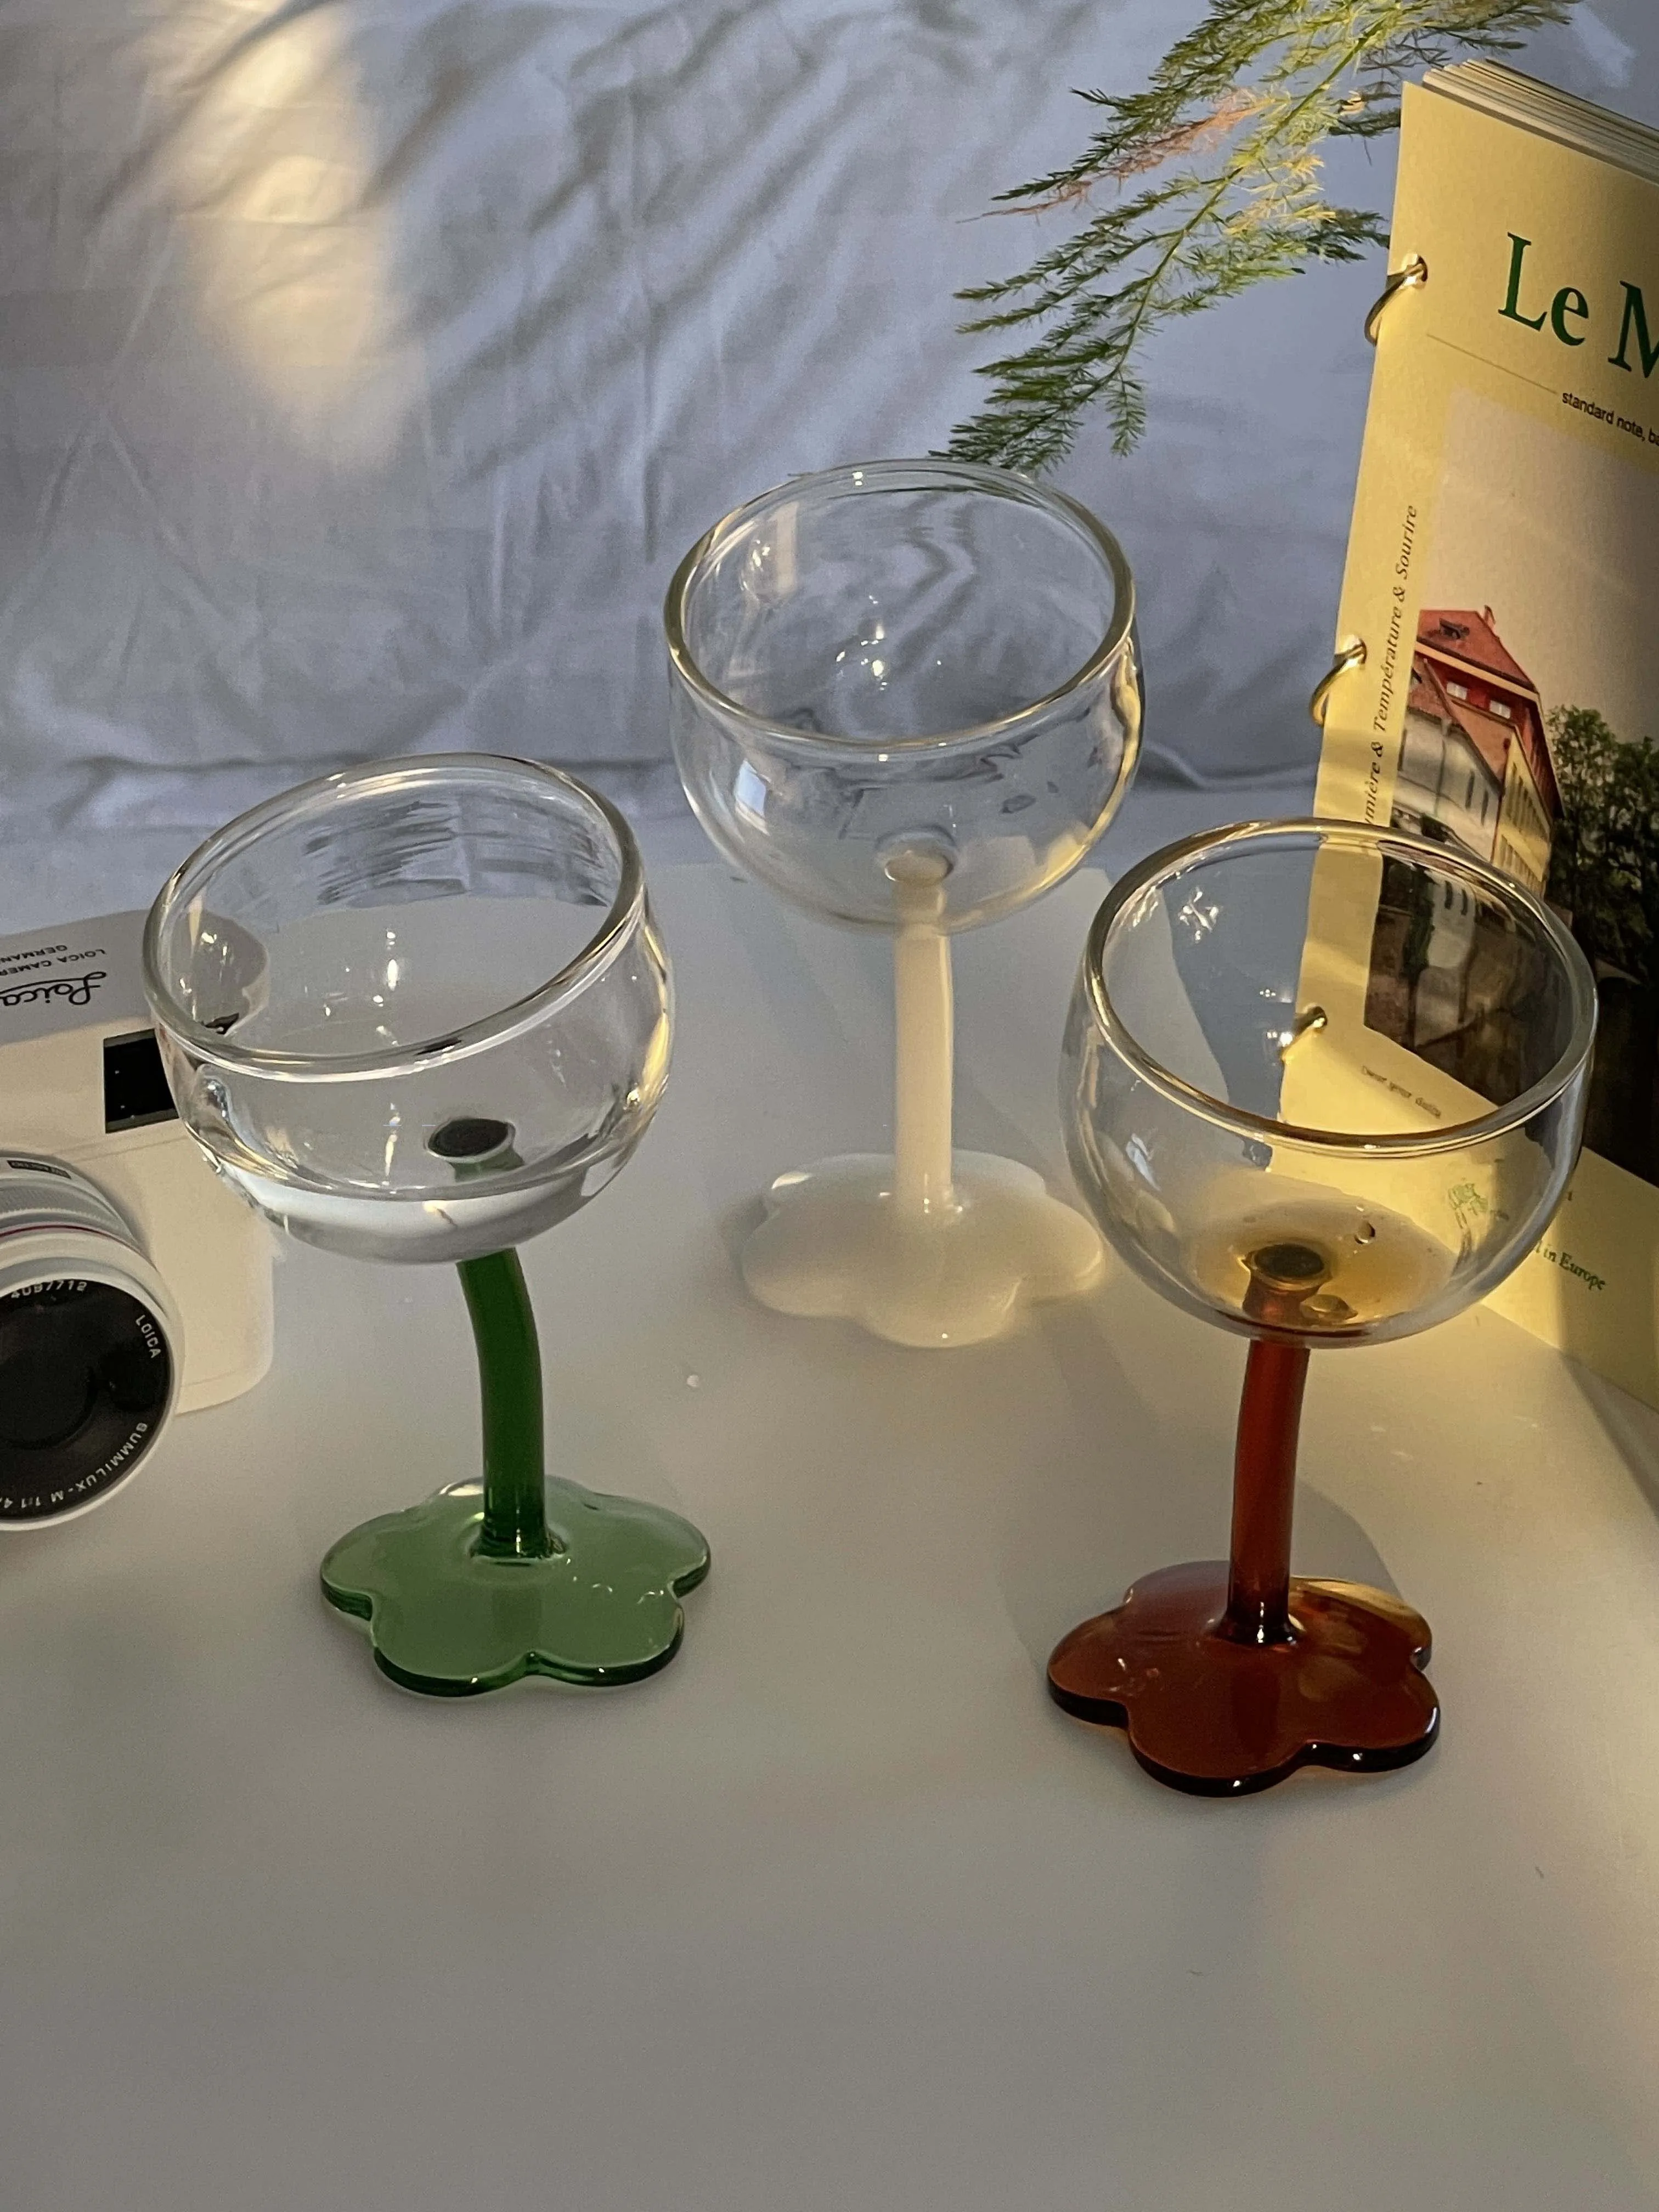 https://ae01.alicdn.com/kf/S610245e91b644d19bb8aef492392a18aM/Homemade-Vintage-Wine-Cup-Lovely-Flower-Water-Cup-Crooked-Handle-Glass-High-Foot-Glass-Creative-Champagne.jpg